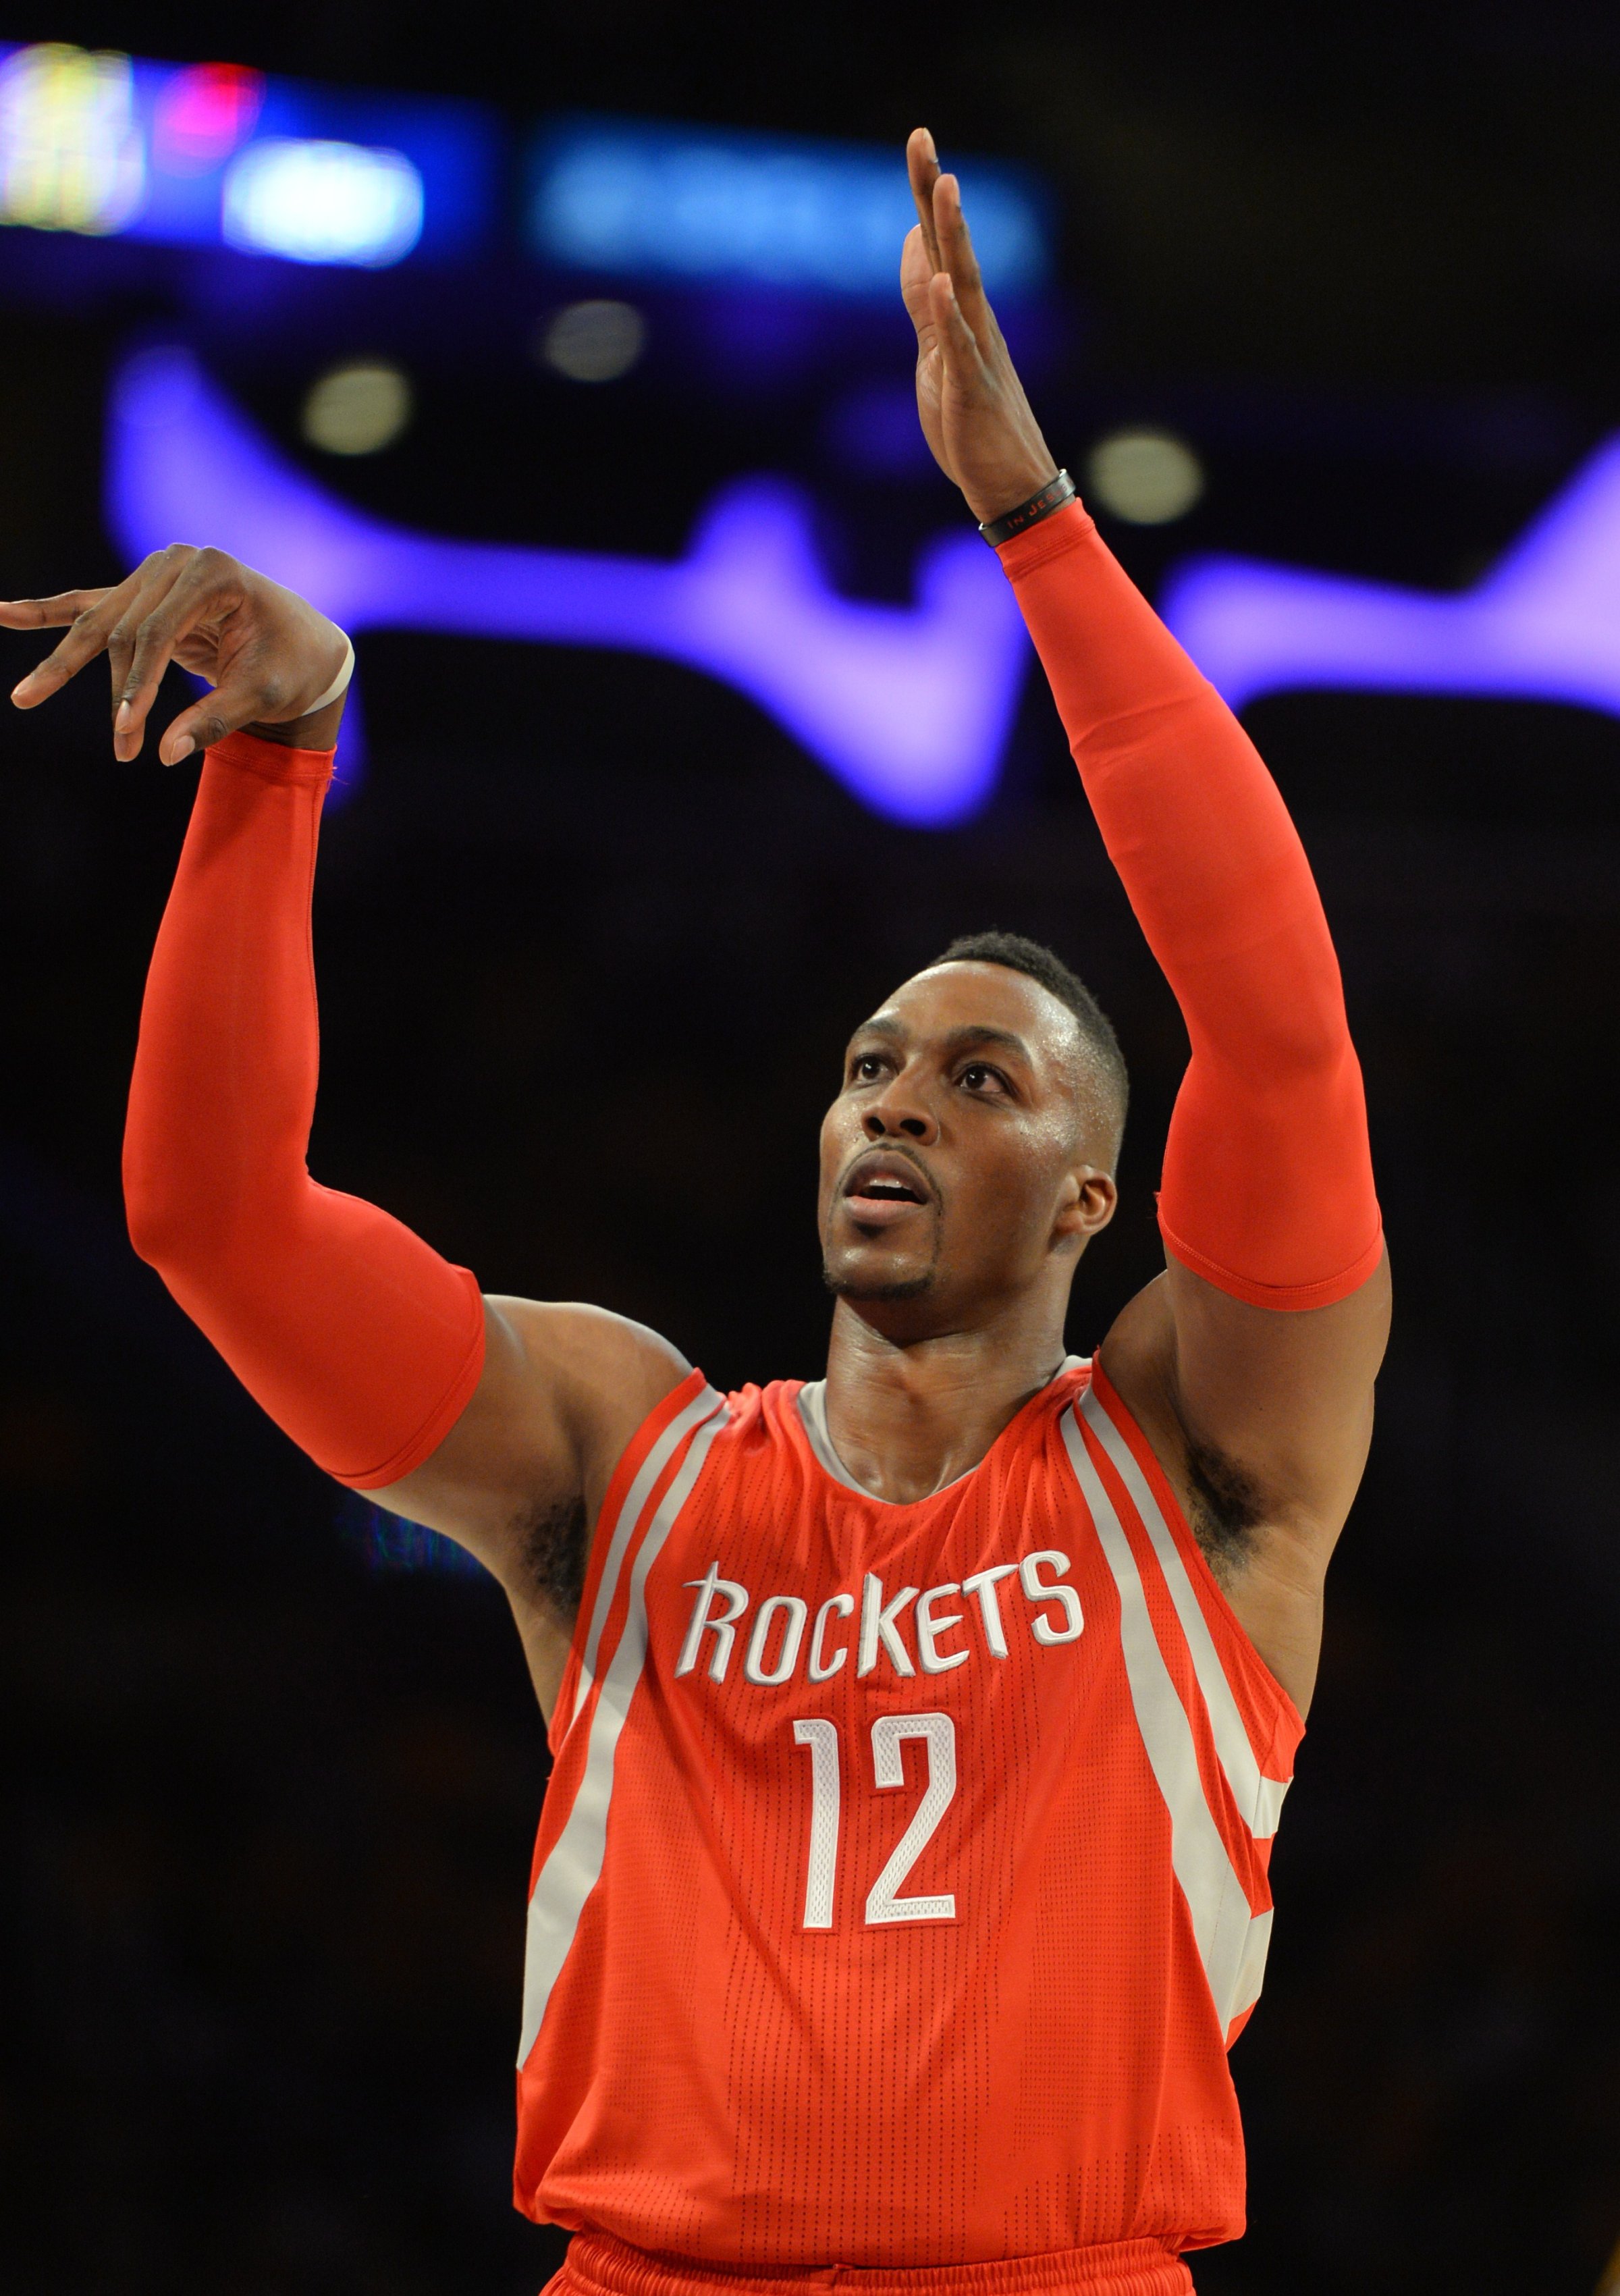 Dwight Howard of the Houston Rockets shoots from the free throw line during the Los Angeles Lakers first regular season NBA game against the Rockets on Oct. 28, 2014 at Staples Center in Los Angeles.